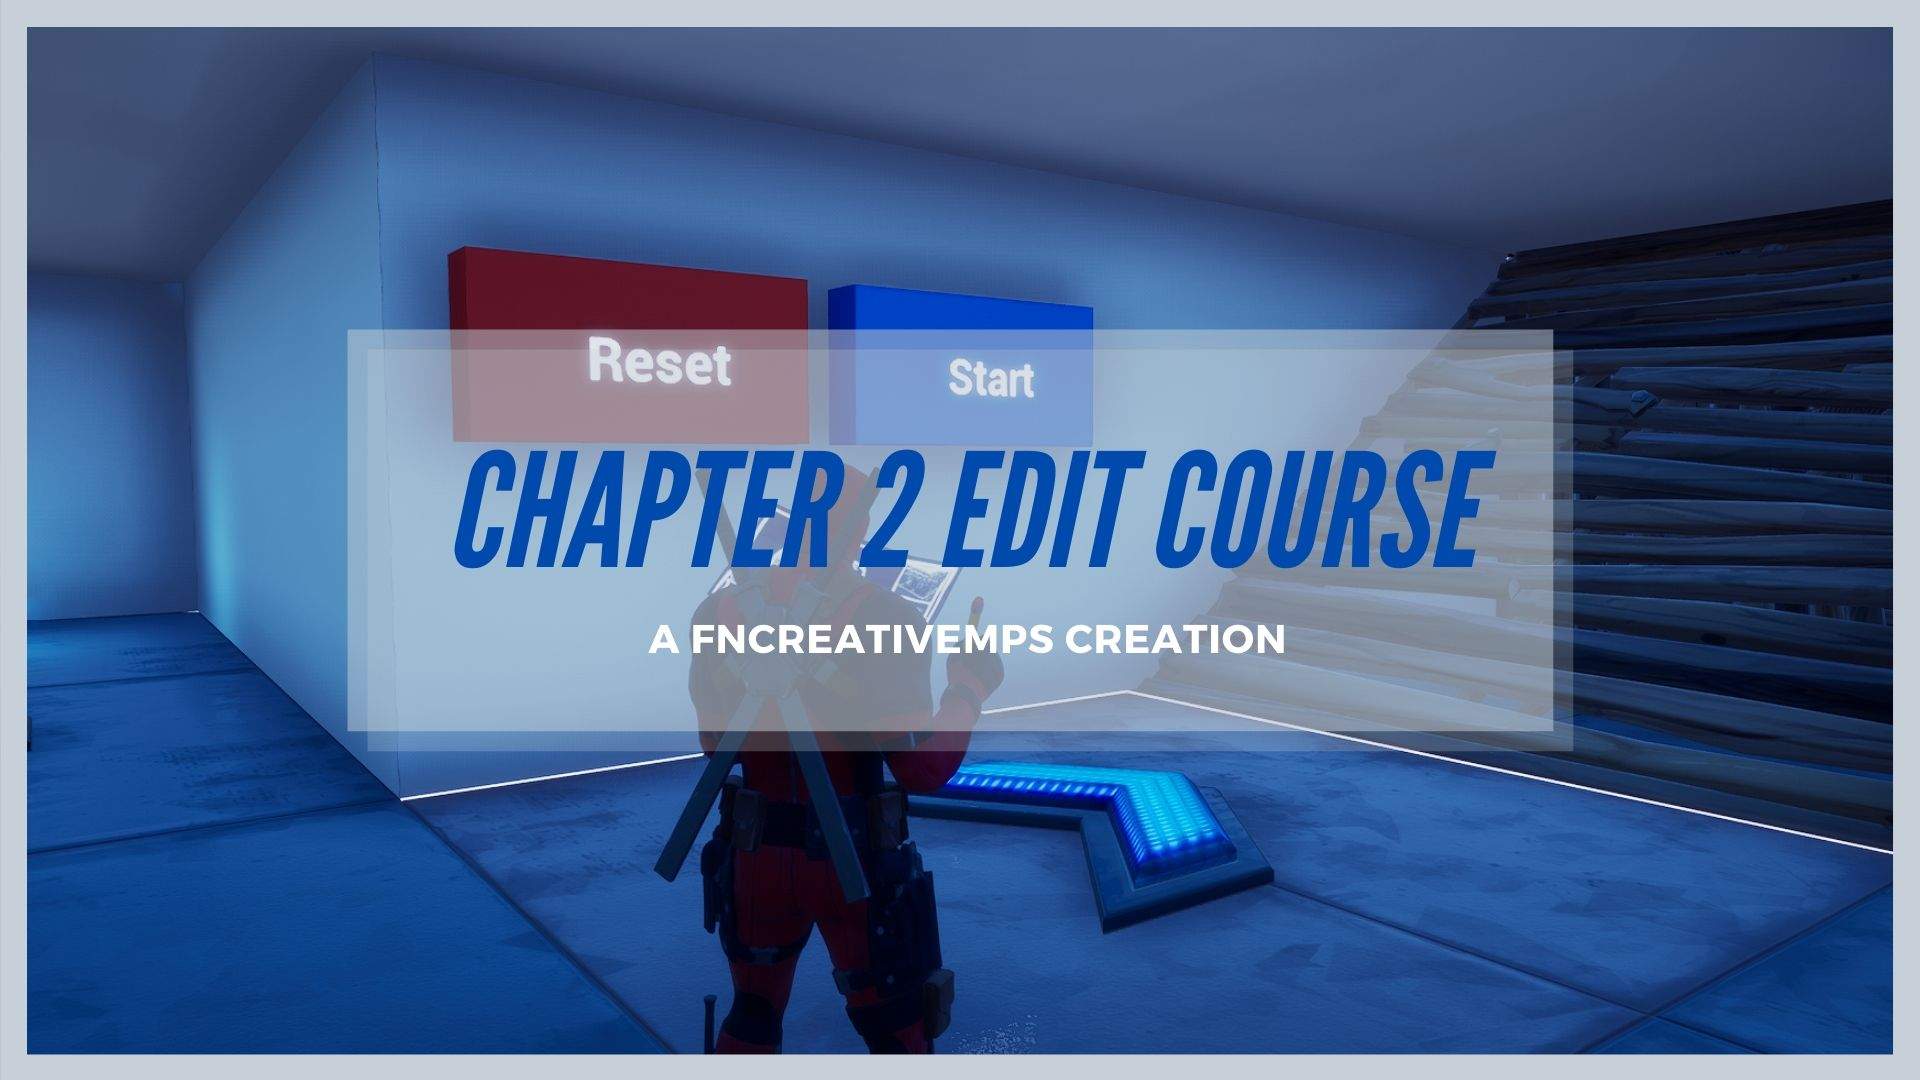 CHAPTER 2 EDIT COURSE